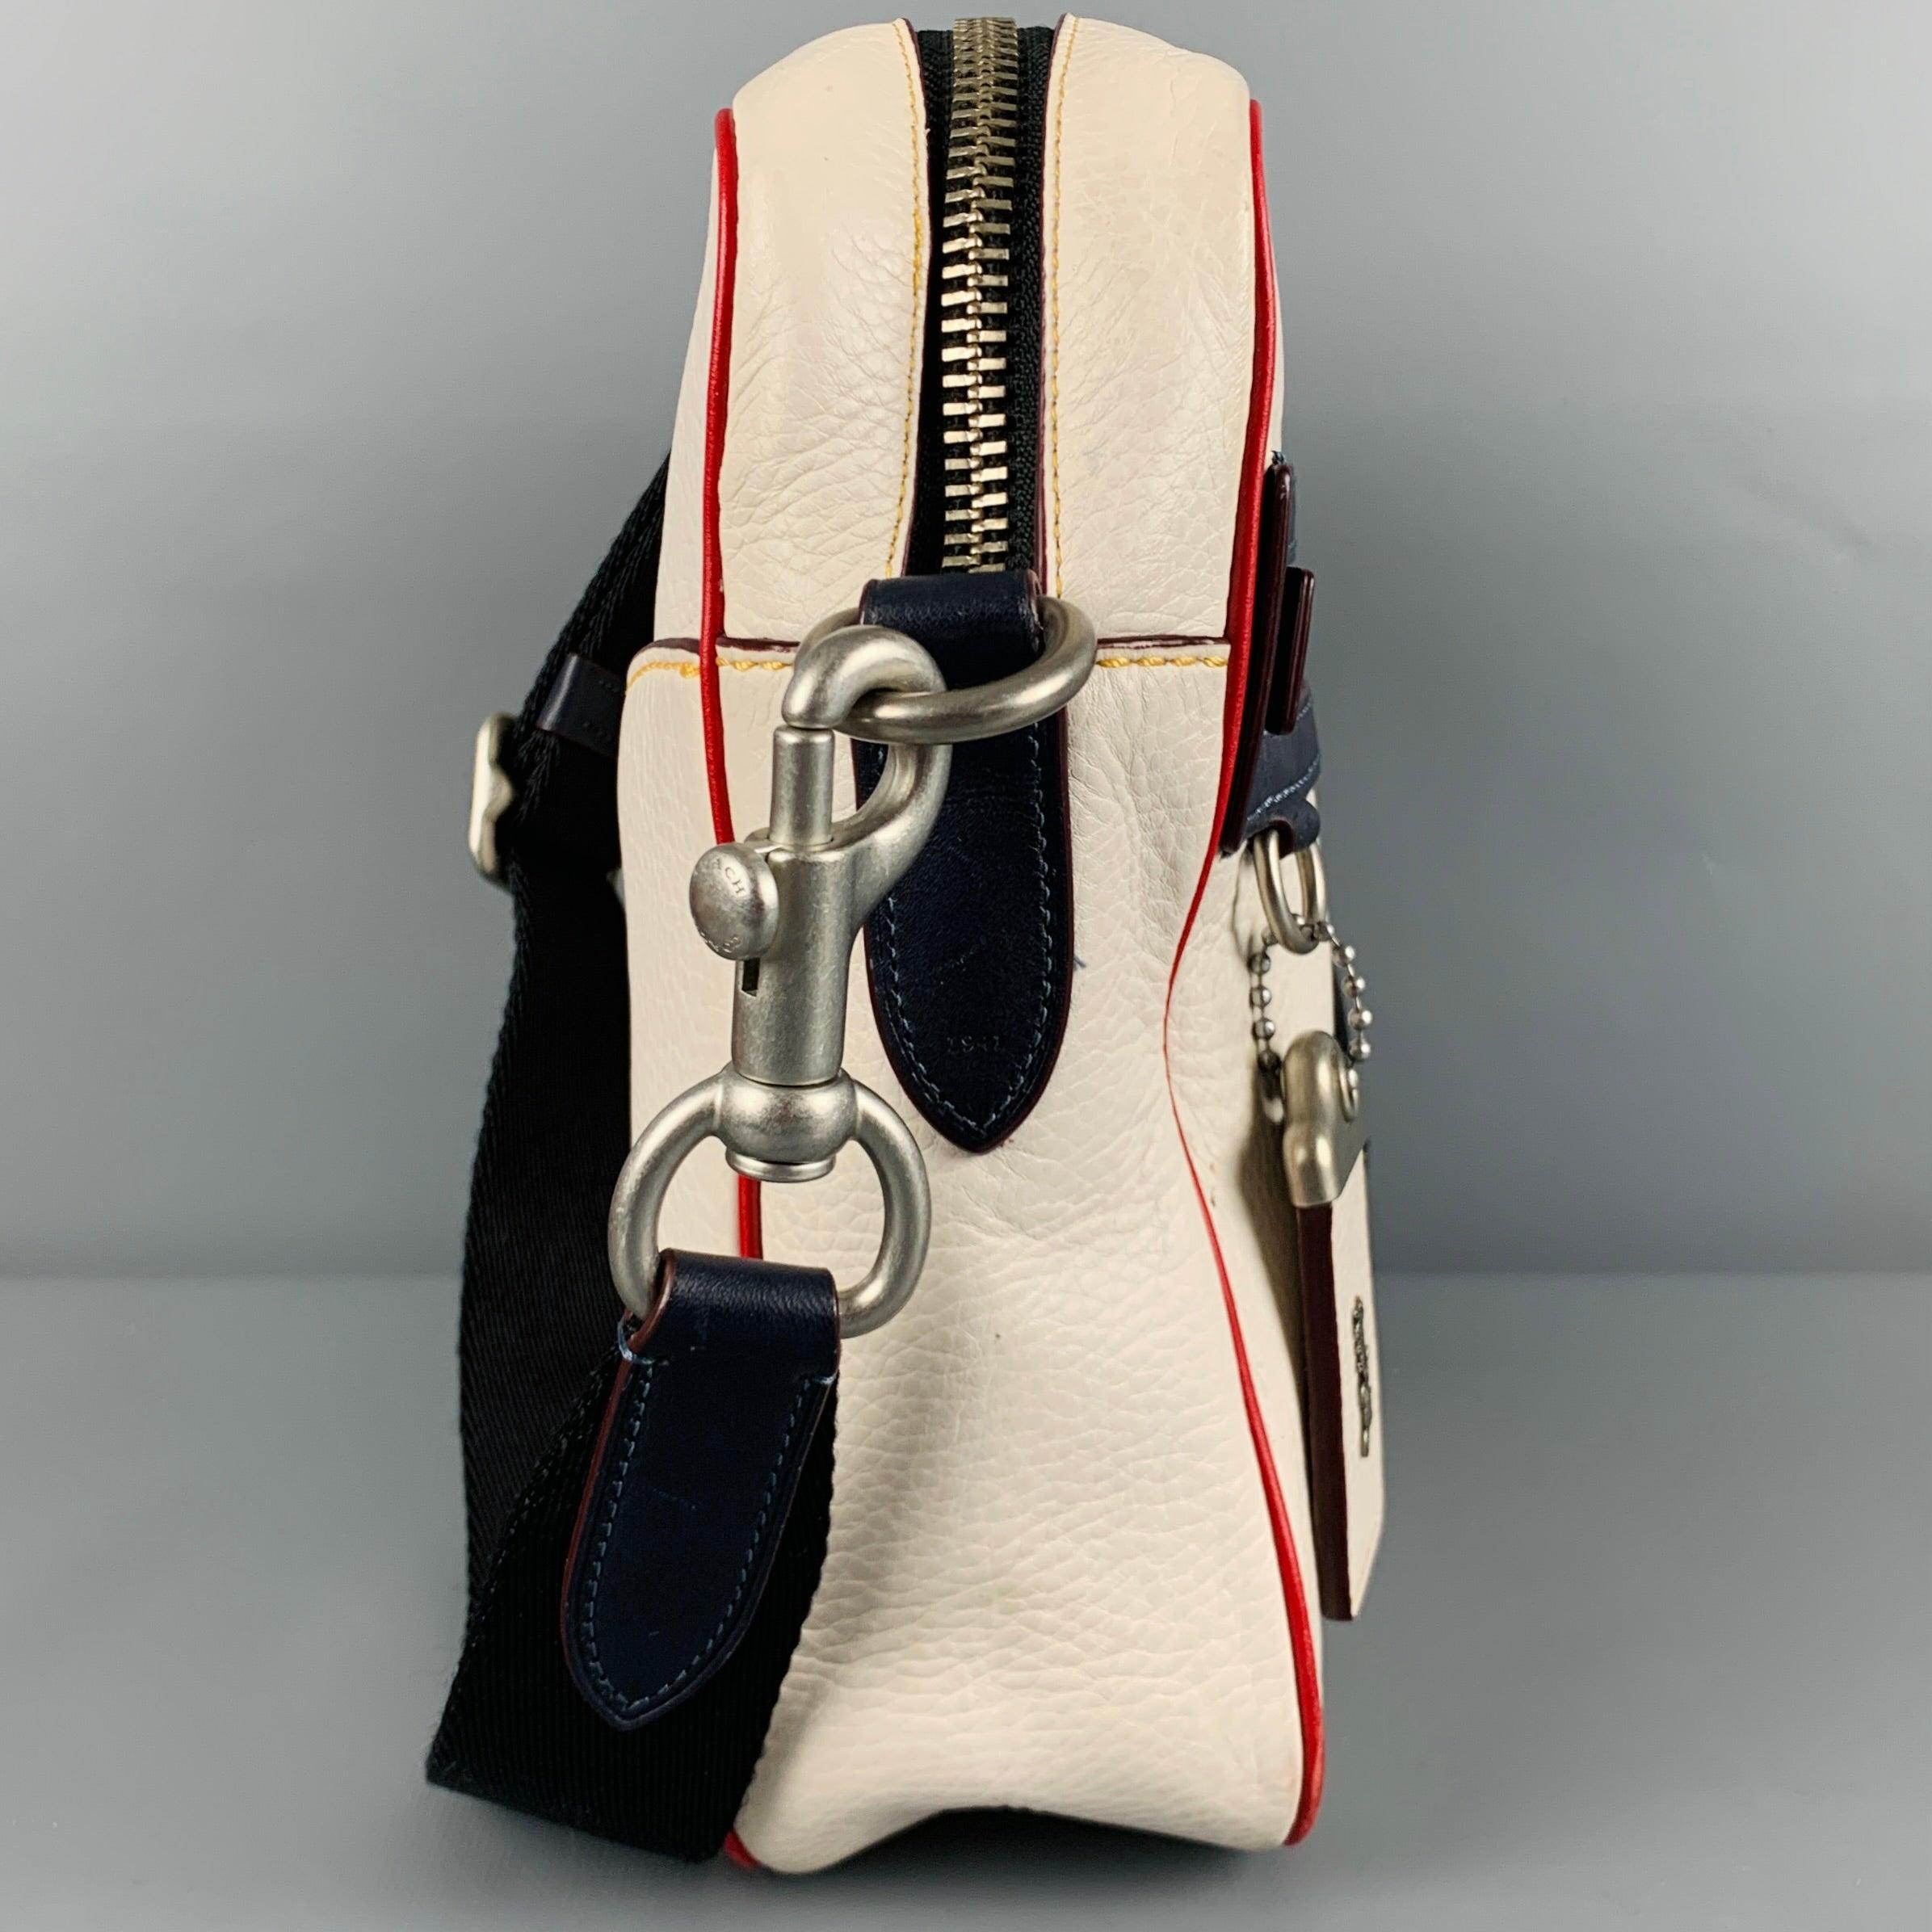 COACH x NASA bag
in a white glovetanned pebble grain leather fabric featuring crossbody style with removable adjustable shoulder strap, multi-color NASA logo, navy and red leather trim, and zip closure.Very Good Pre-Owned Condition. Minor marks.